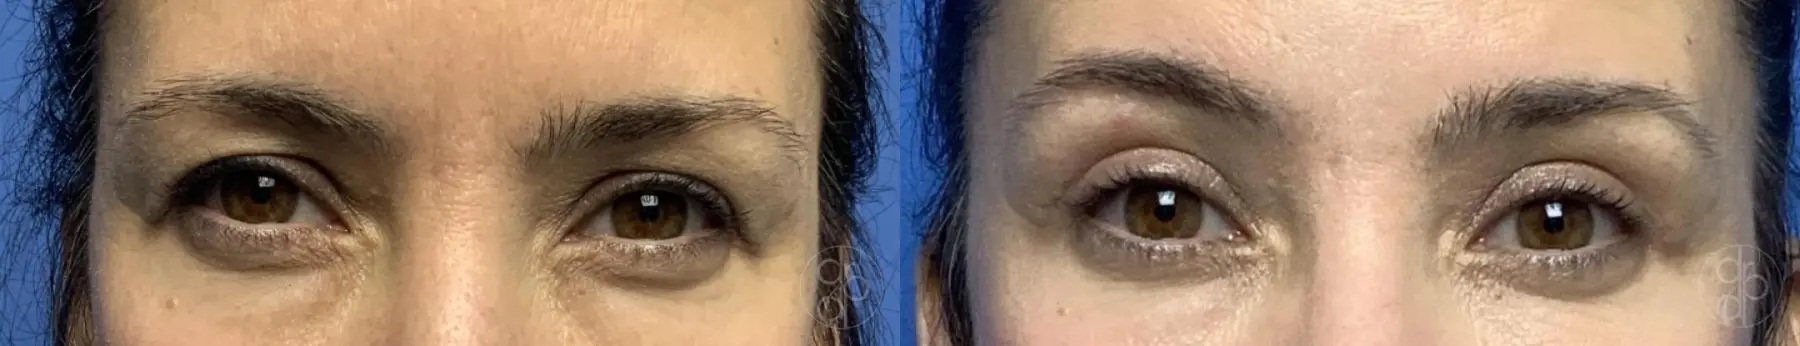 patient 12658 blepharoplasty before and after result - Before and After 2